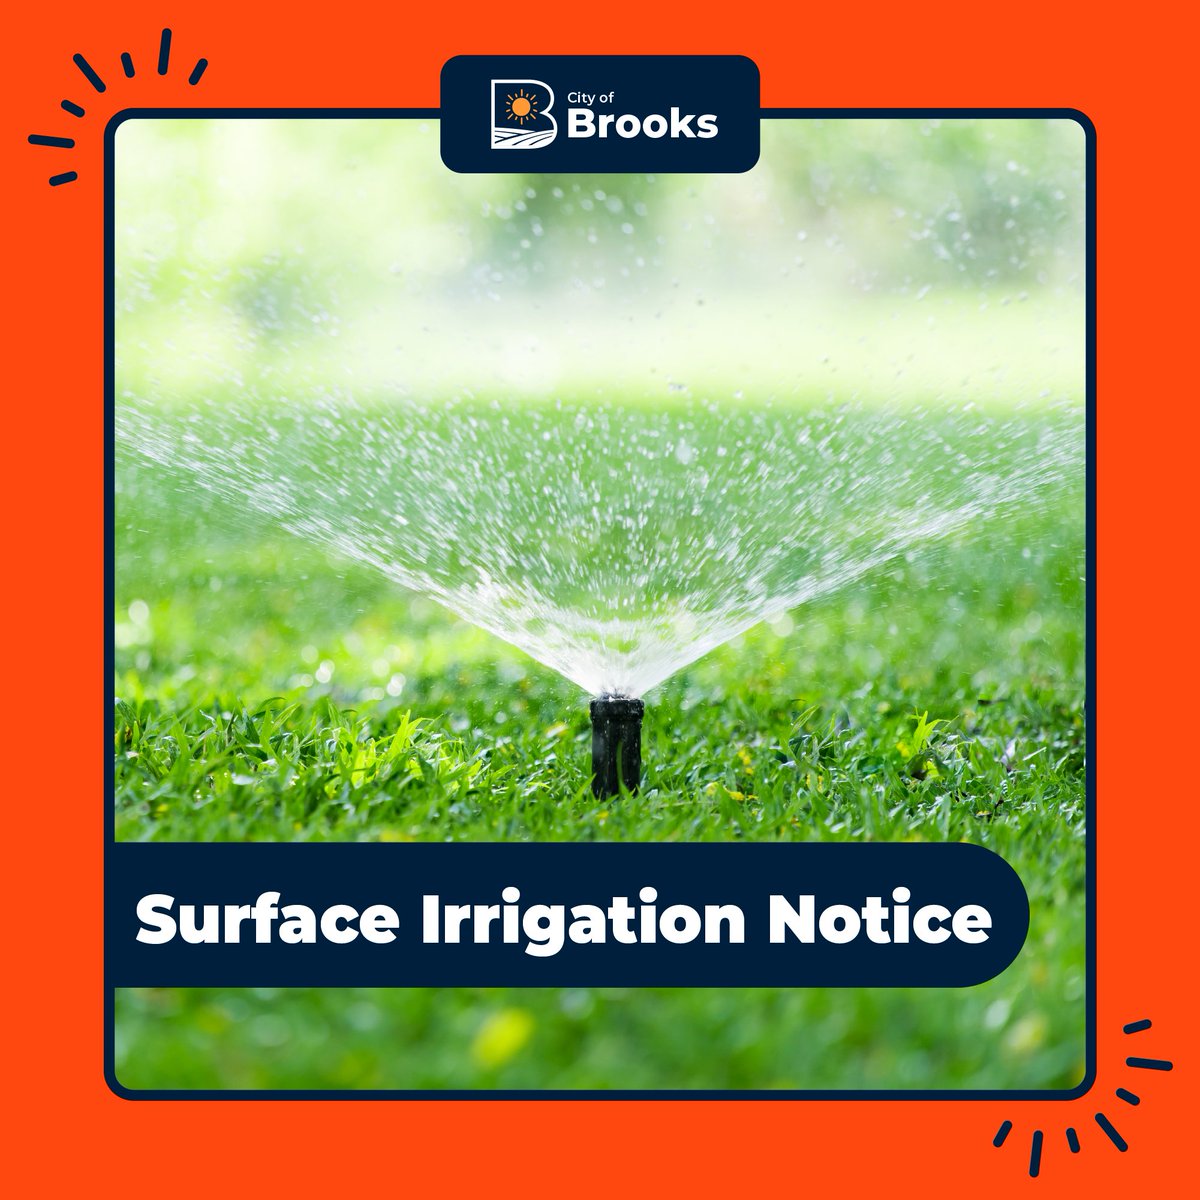 Irrigation has been turned off in the West End until further notice due to a break on 4th Ave W, between 5 St W and 6 St W.